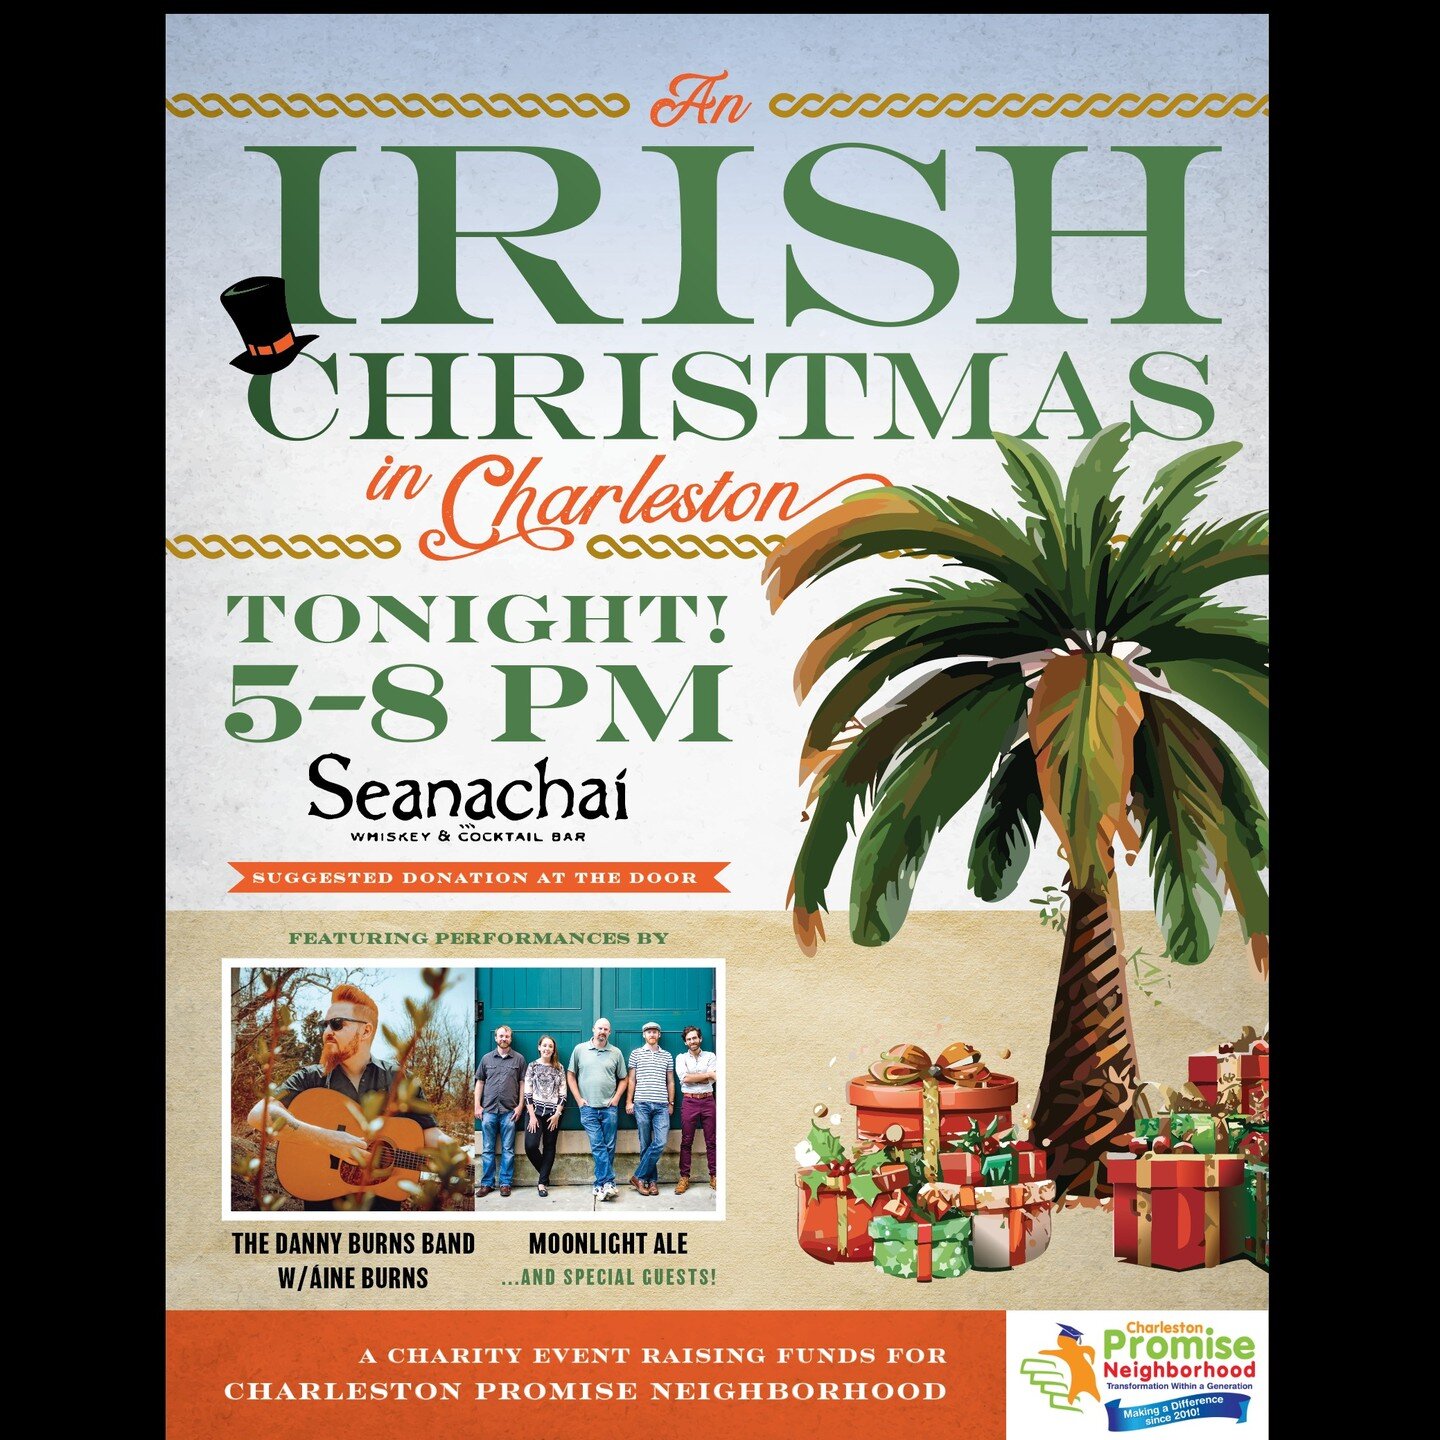 The day is finally here: An Irish Christmas in Charleston Show and Fundraiser is tonight at 5 PM at @seanachaiwhiskeyandcocktailbar! Let's end the year with a bang and raise some money for Charleston Promise Neighborhood while we're at it. 

All ages